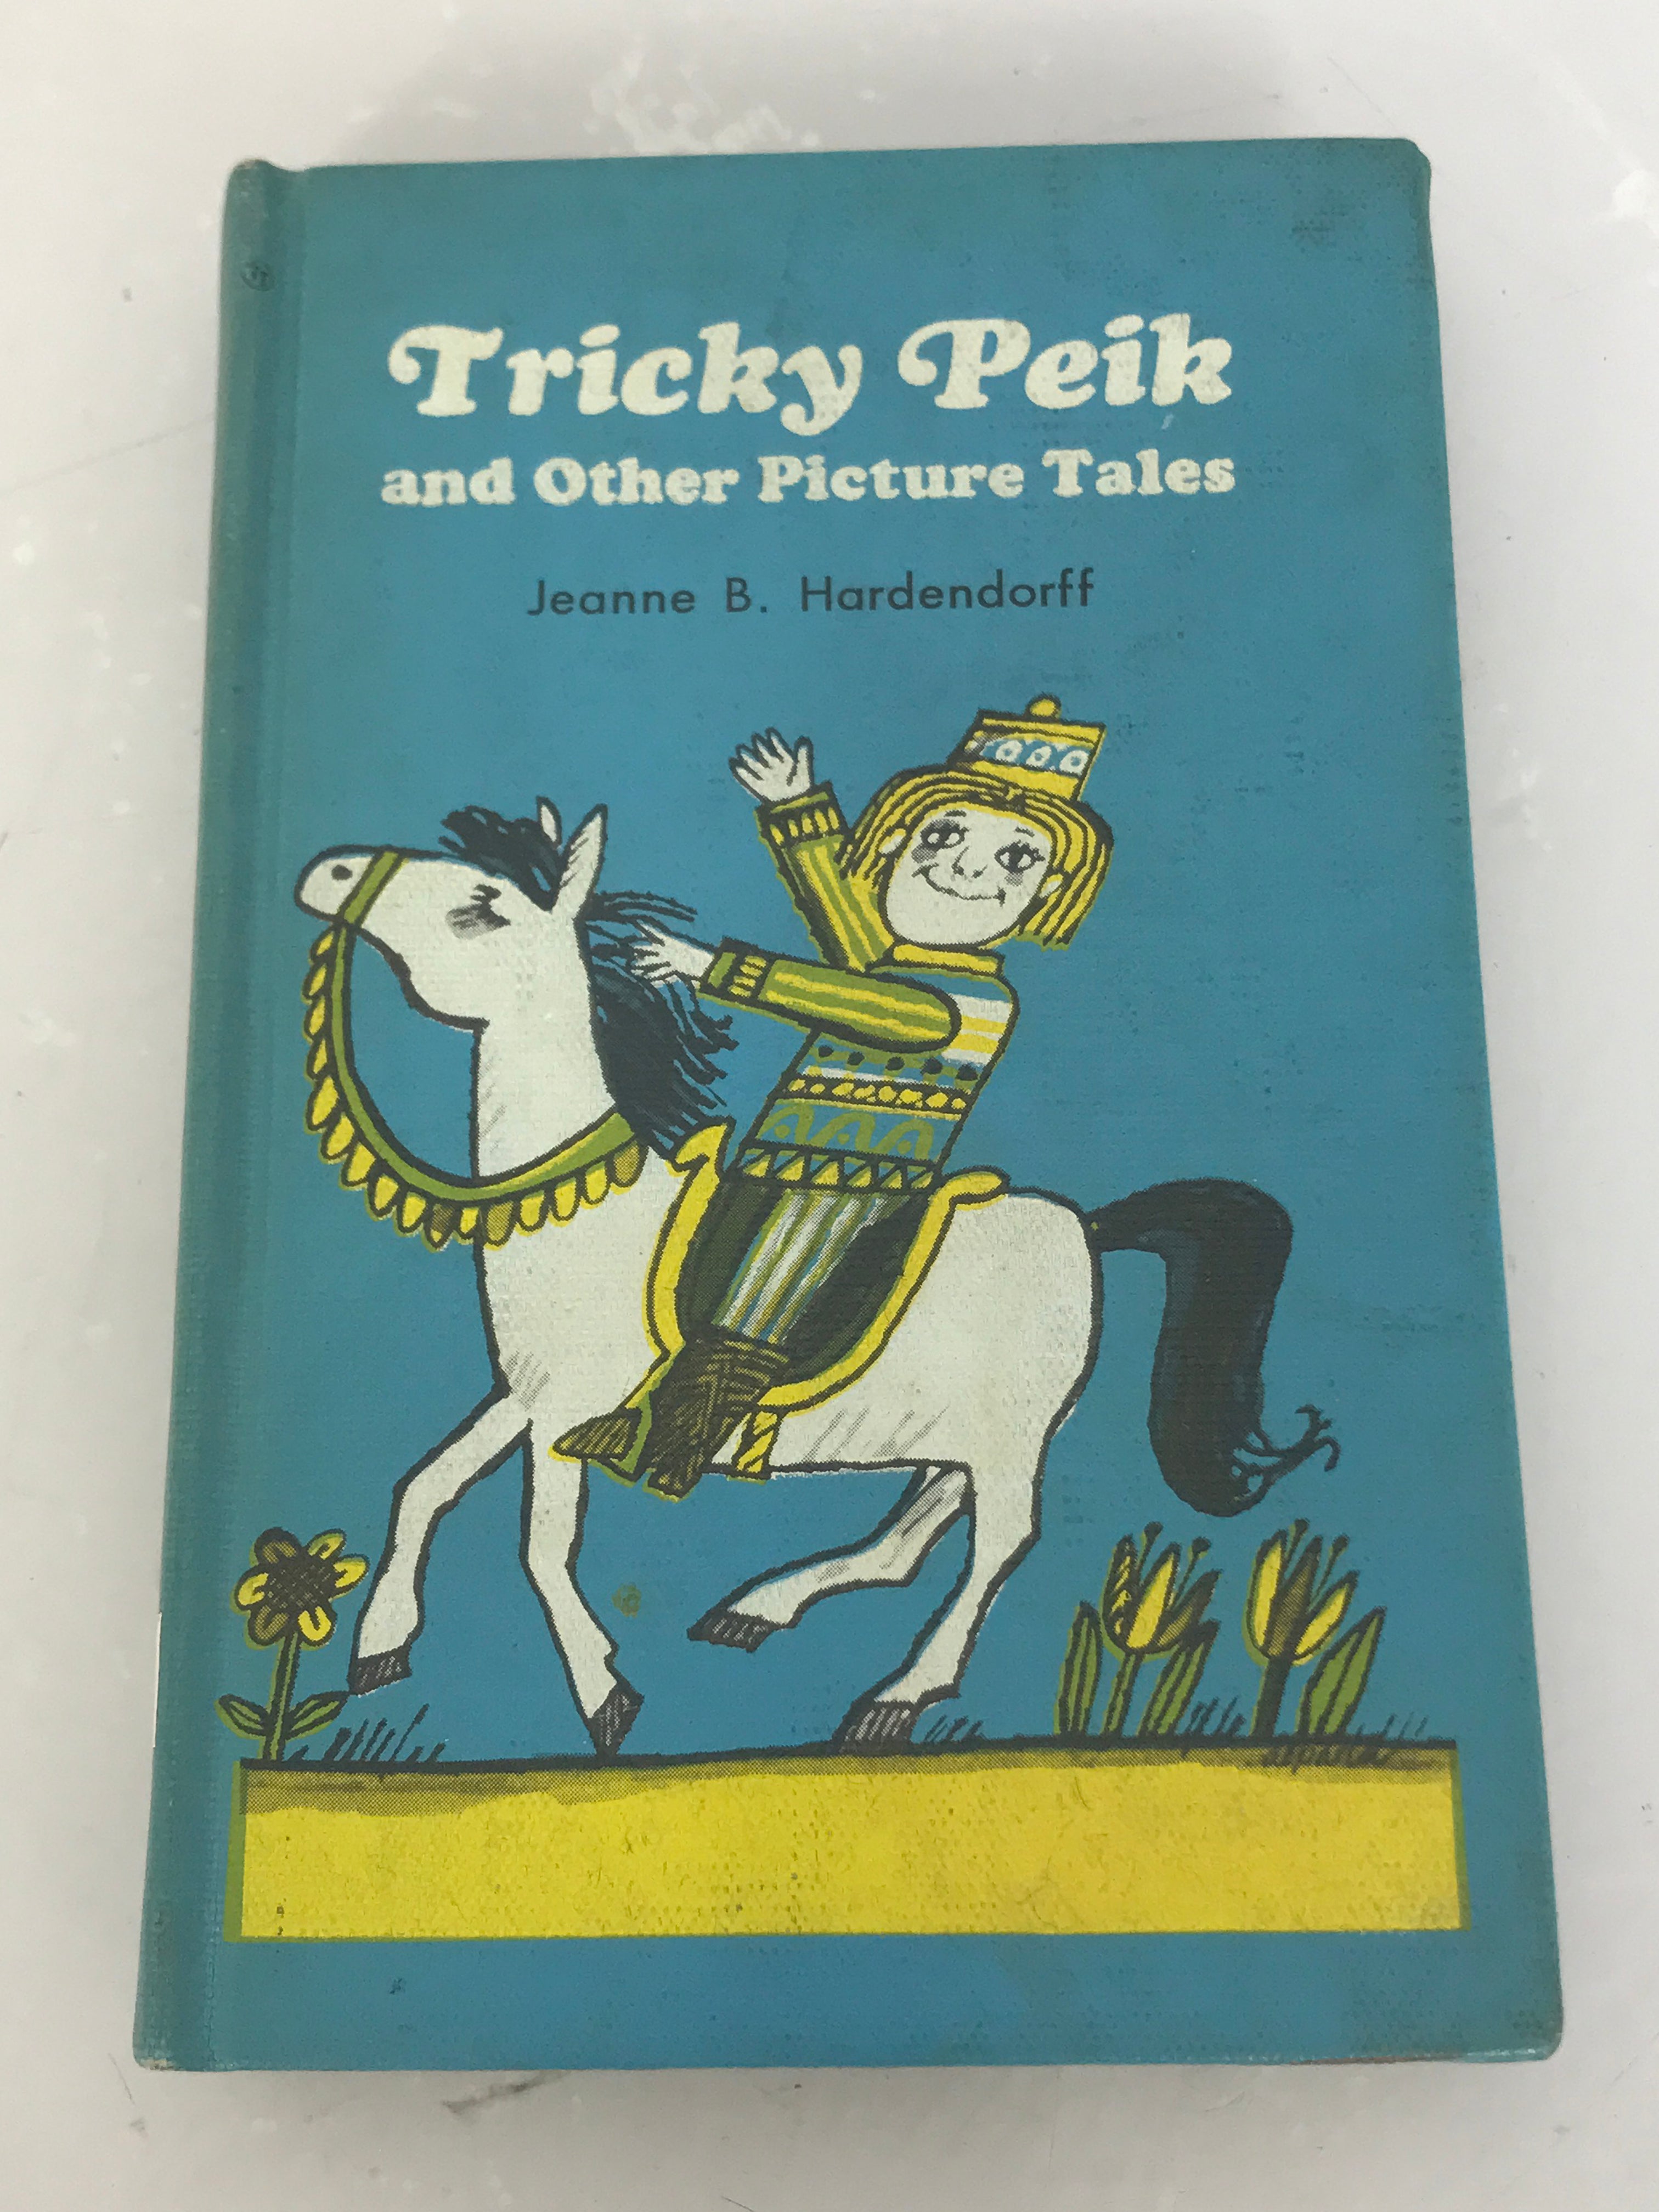 Lot of 3 Folk Tales: Tricky Peik and Other Picture Tales, Beyond the Clapping Mountains, Tales From the Elves' Forest 1943-1967 HC Vintage